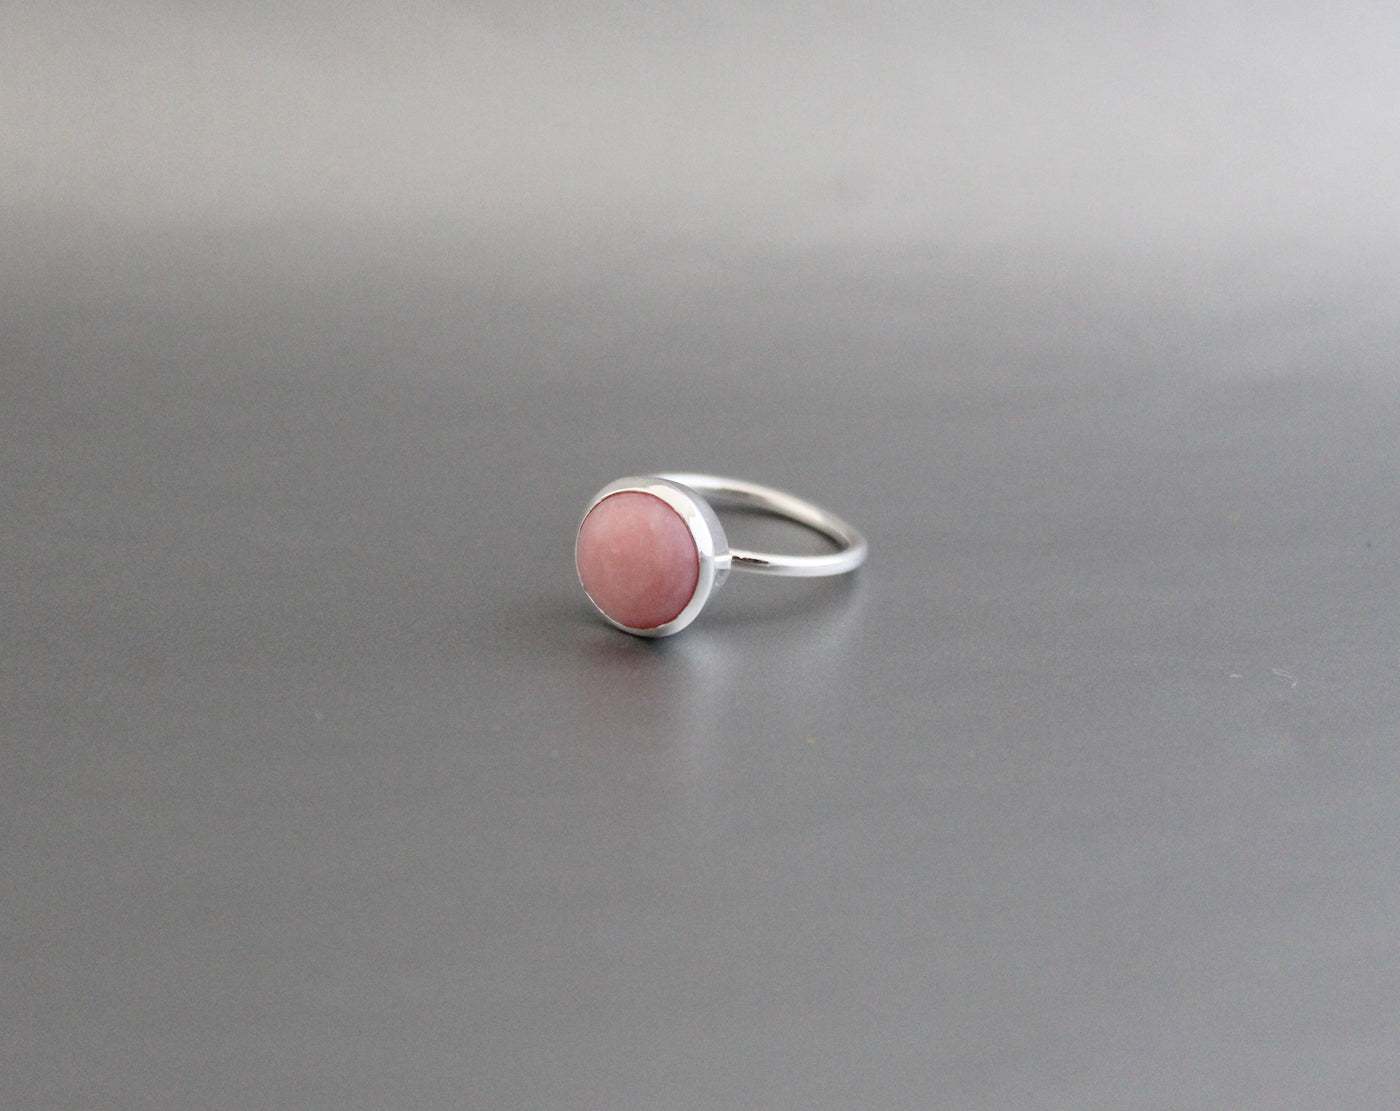 Pink Opal Ring, Birthstone Ring, Wedding Band, Delicate Ring, Opal Ring, Gemstone Ring, 925 Sterling Silver Ring, Best Gift For Women